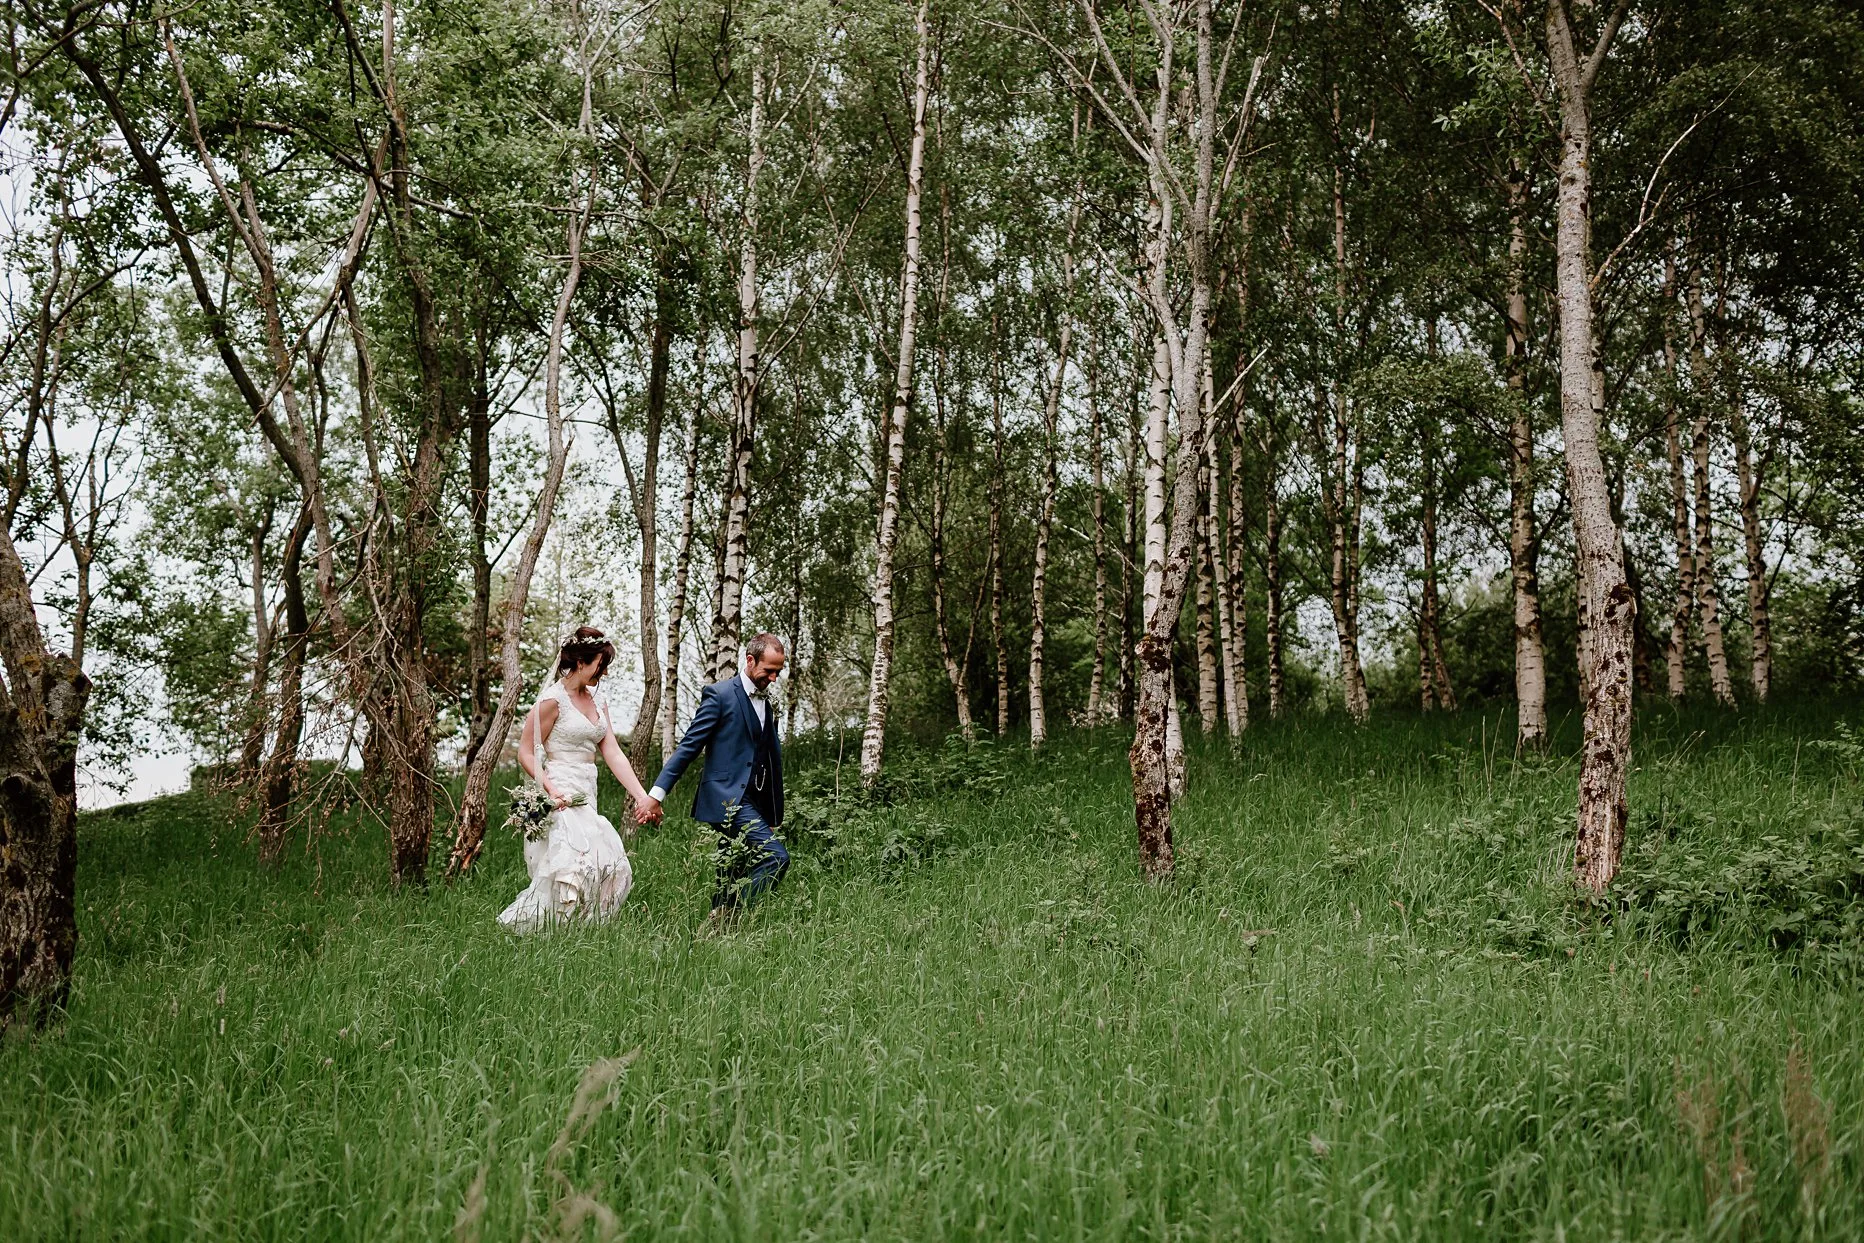 Bride and groom walking through long grass surrounded by silver birch trees in the garden of New House Farm.